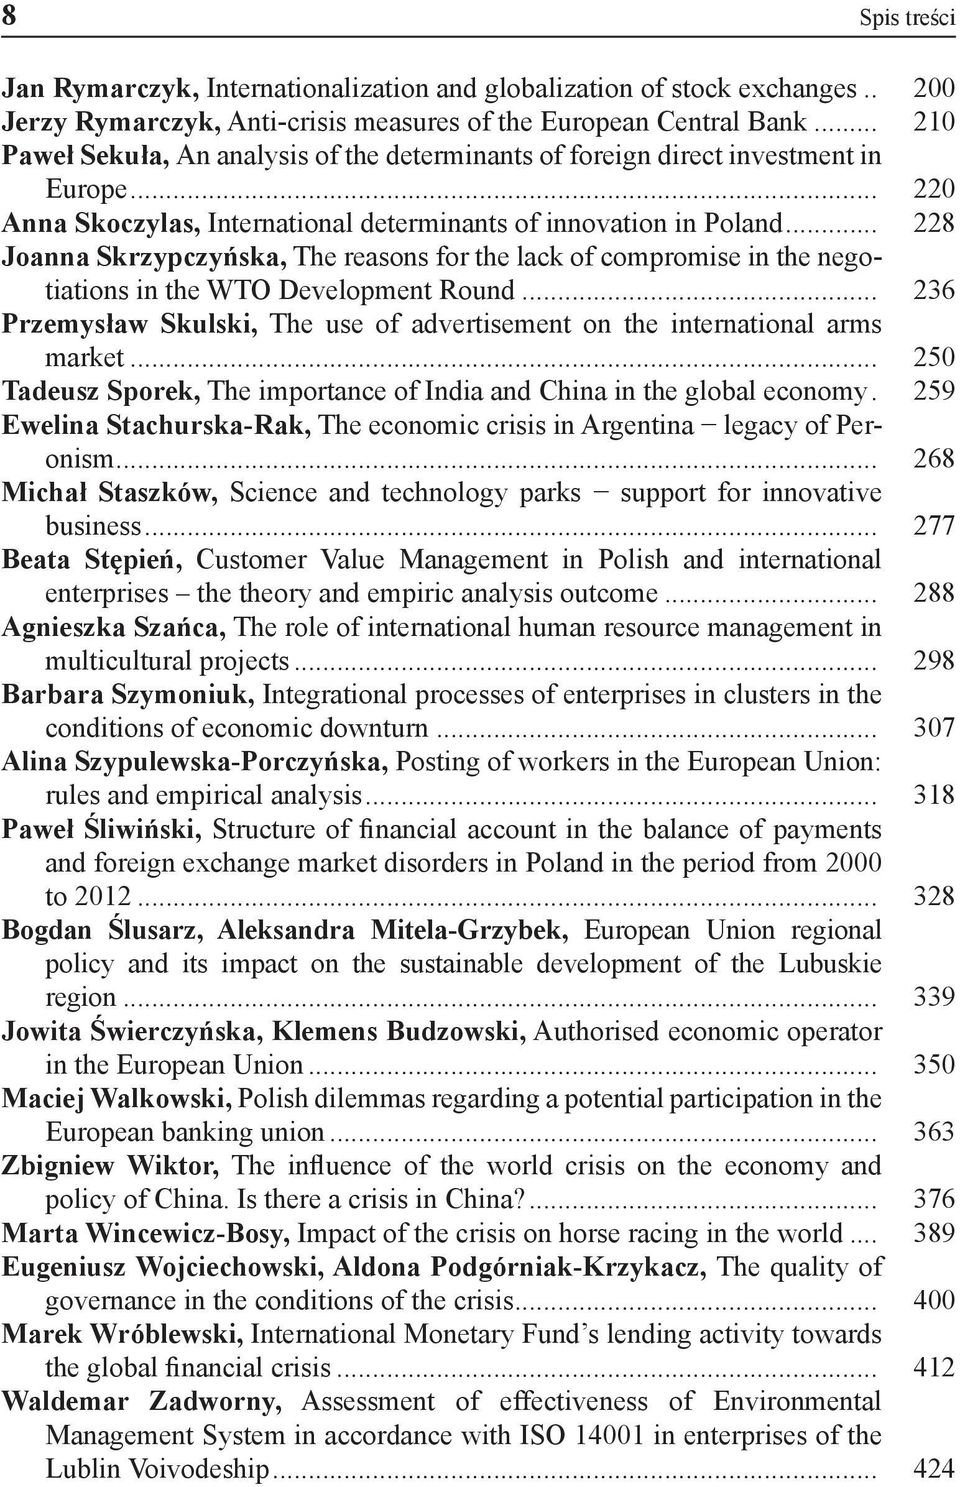 .. 228 Joanna Skrzypczyńska, The reasons for the lack of compromise in the negotiations in the WTO Development Round... 236 Przemysław Skulski, The use of advertisement on the international arms market.